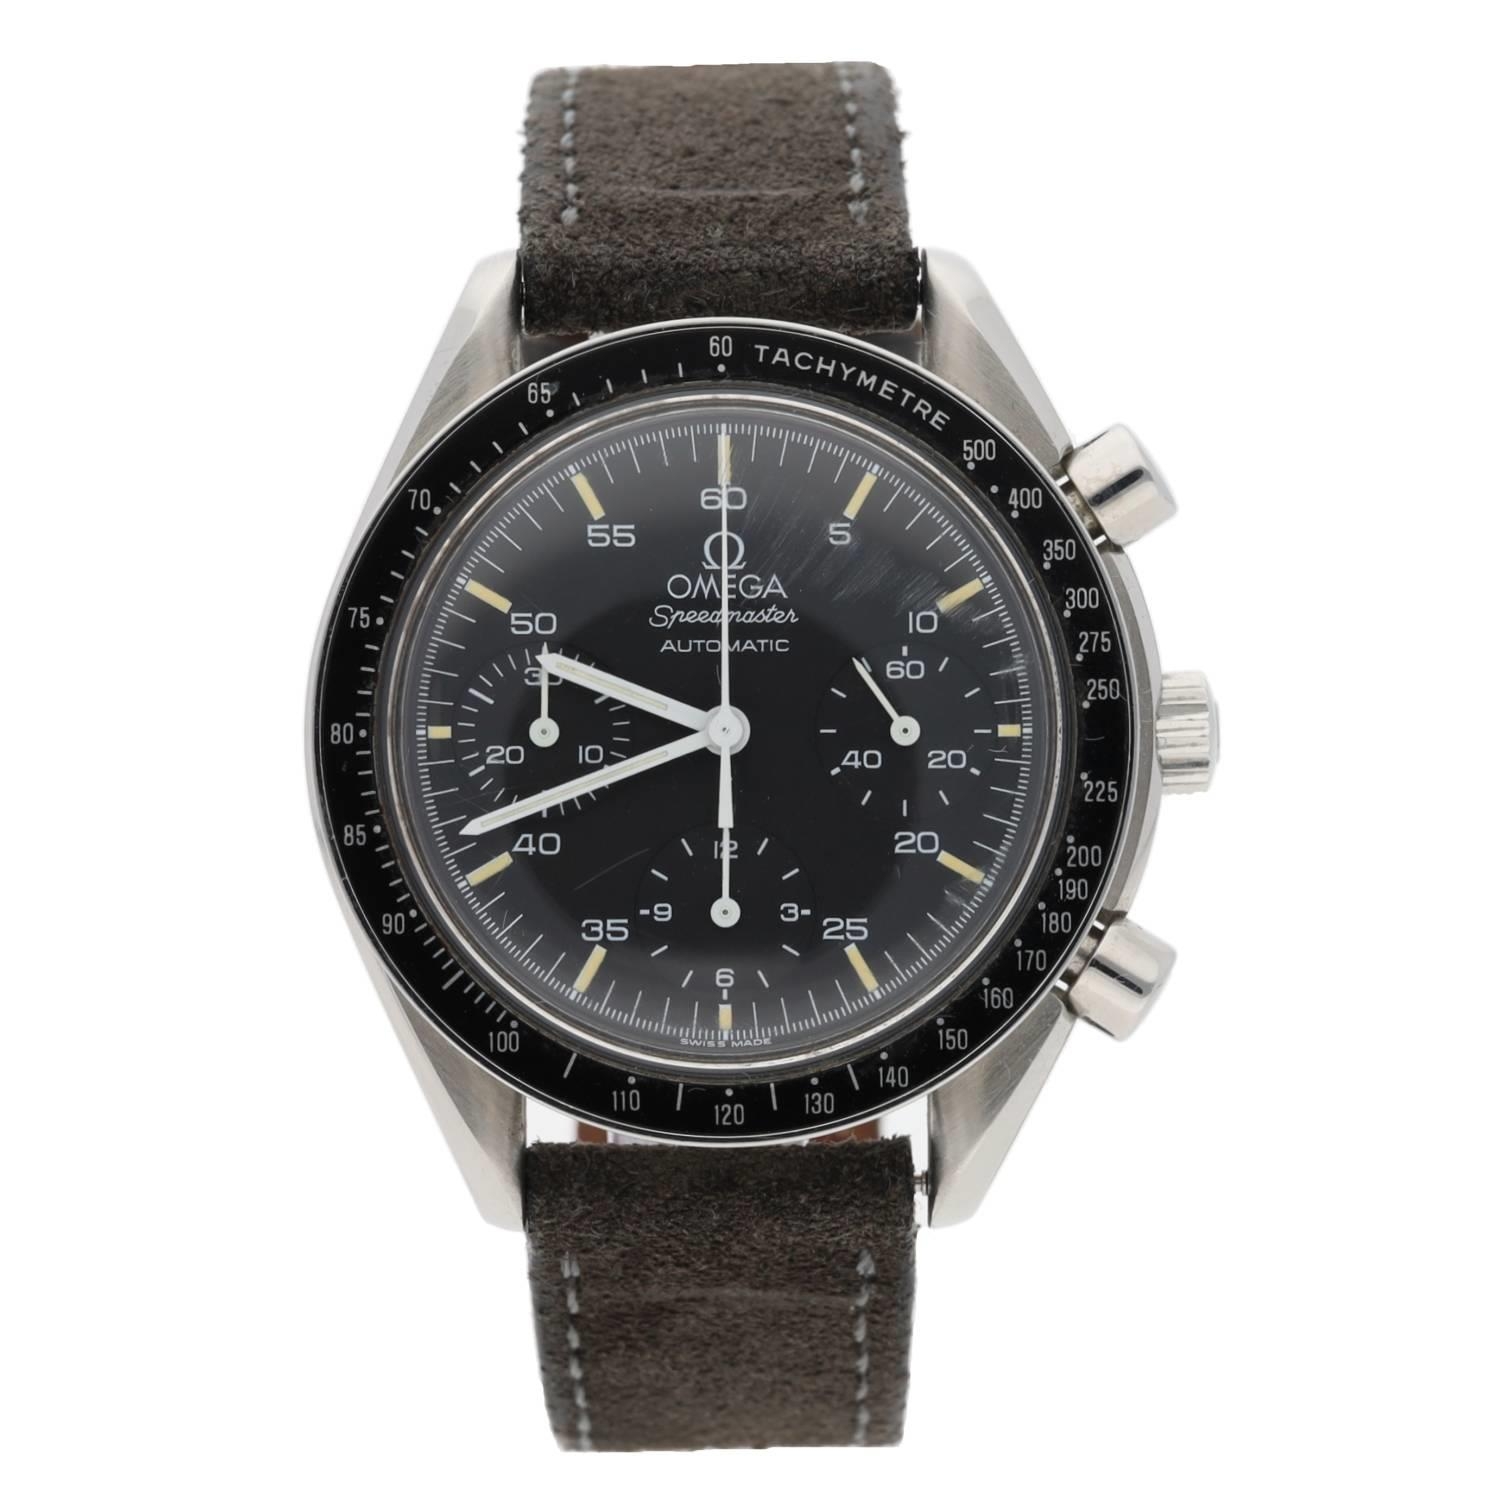 Omega Speedmaster Reduced Chronograph automatic stainless steel gentleman's wristwatch, reference